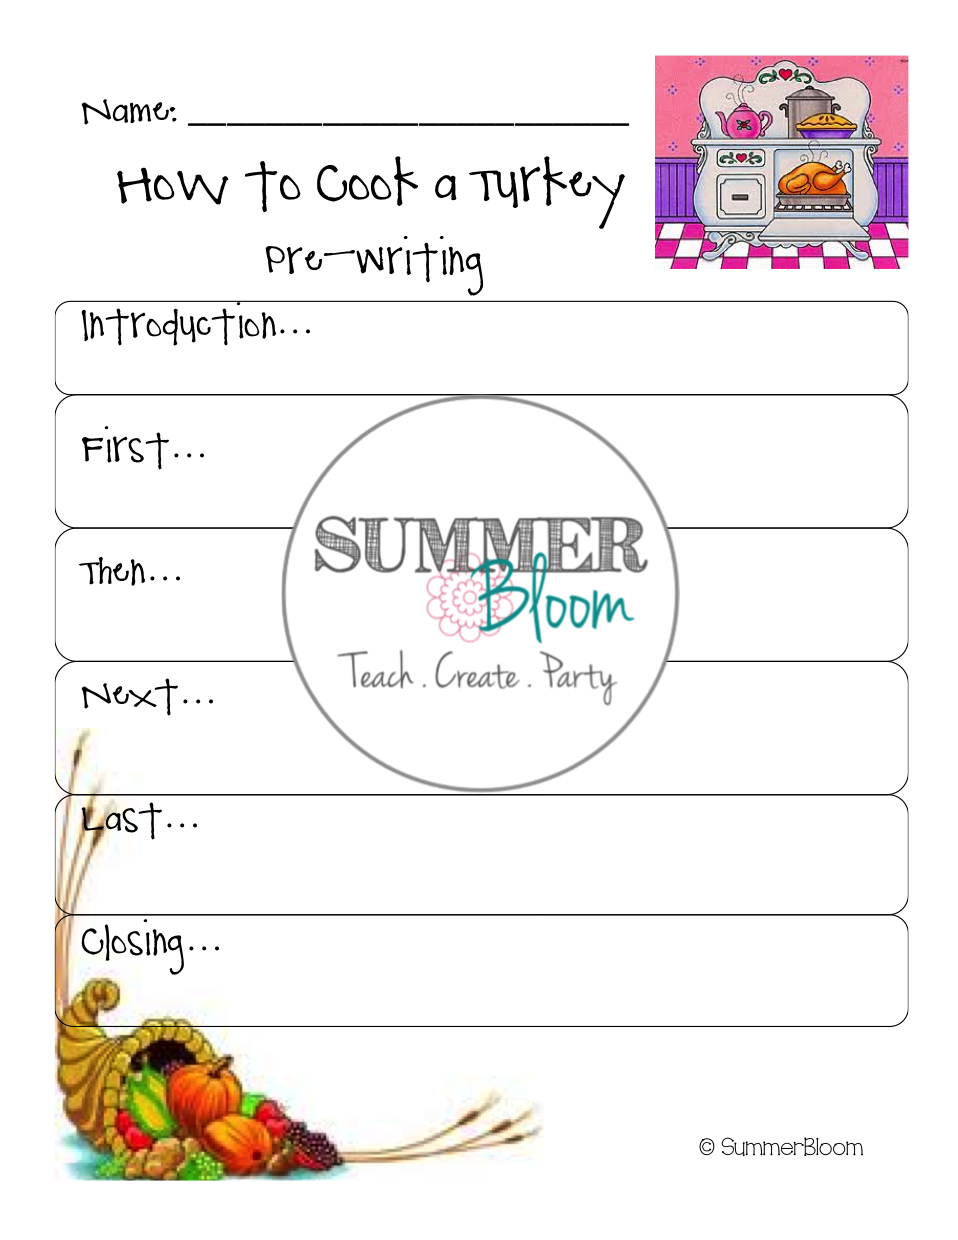 Summer Bloom: Teach. Create. Party: How to Cook a Turkey Writing Activity